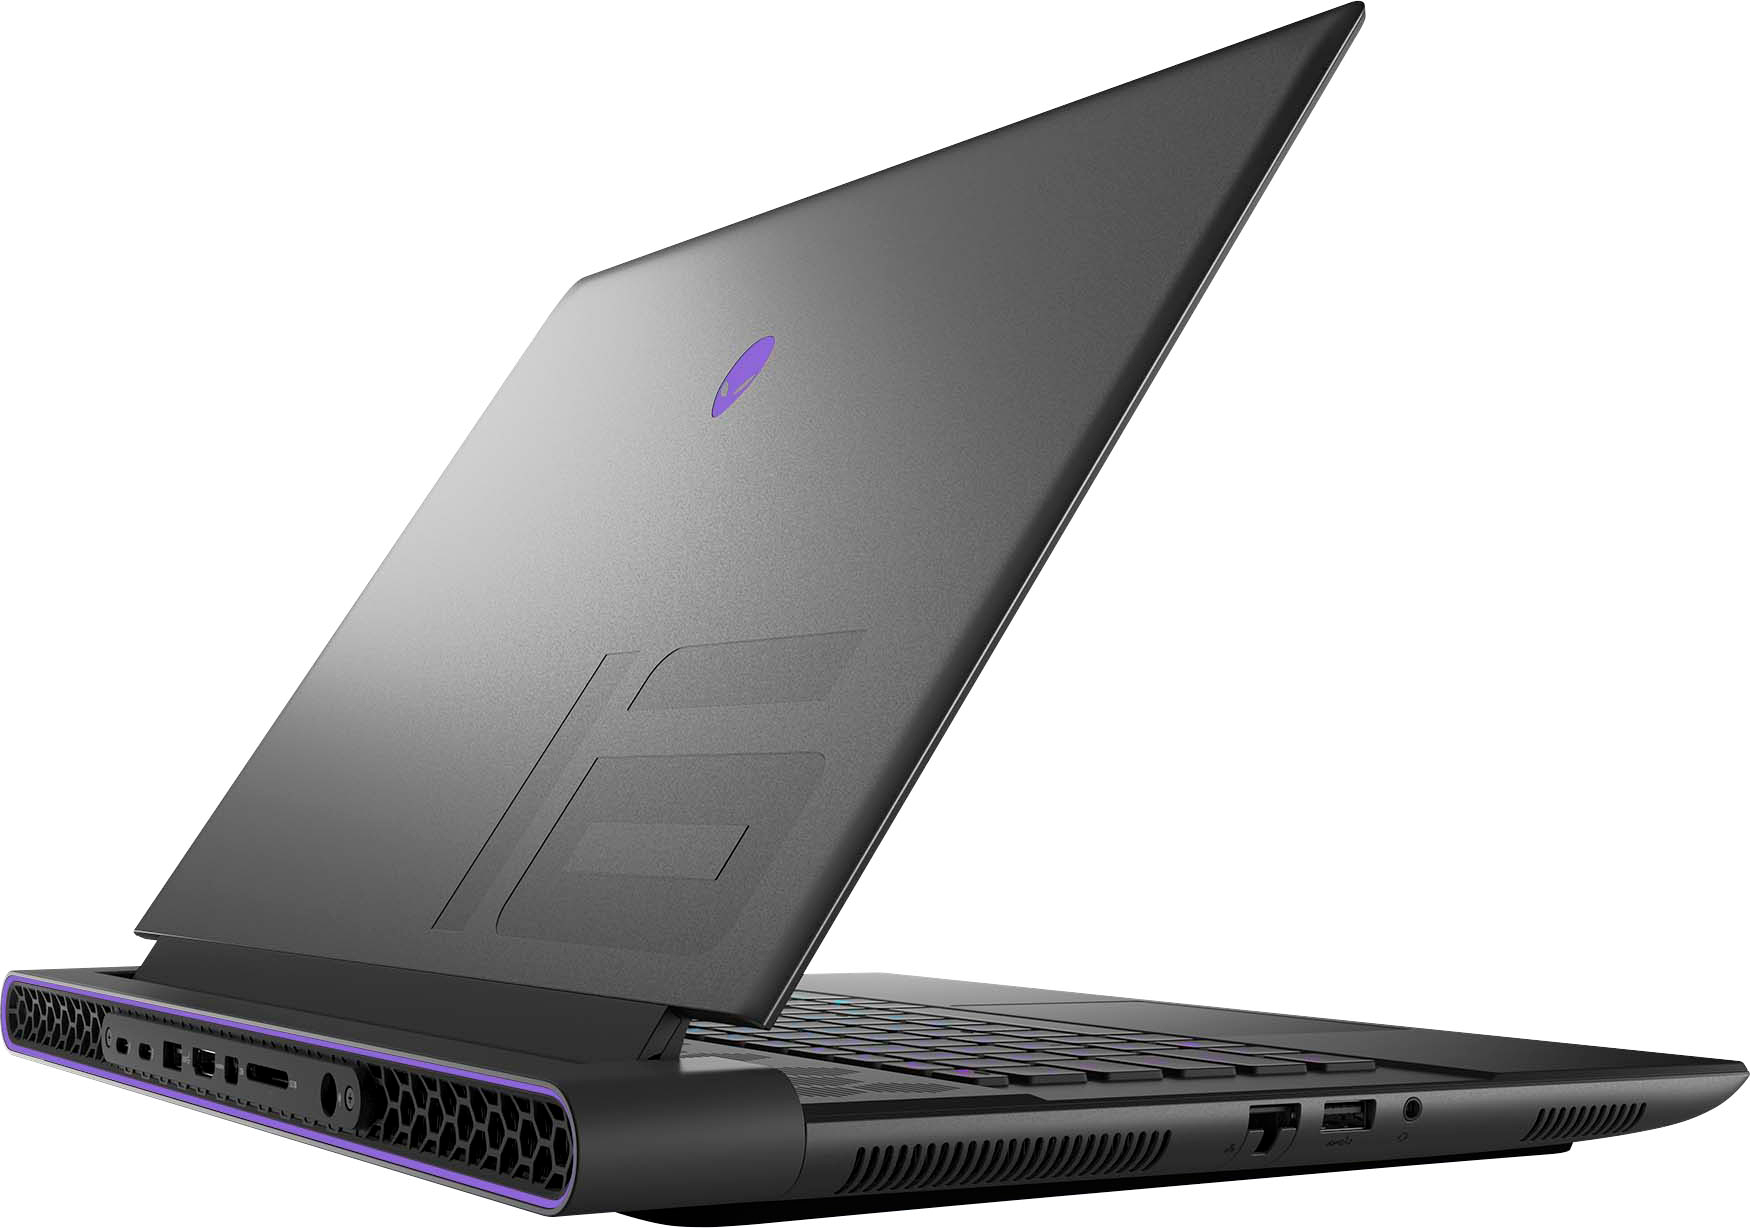 Score an Alienware m16 RTX 4060 Gaming Laptop for Only $1249.99 - IGN